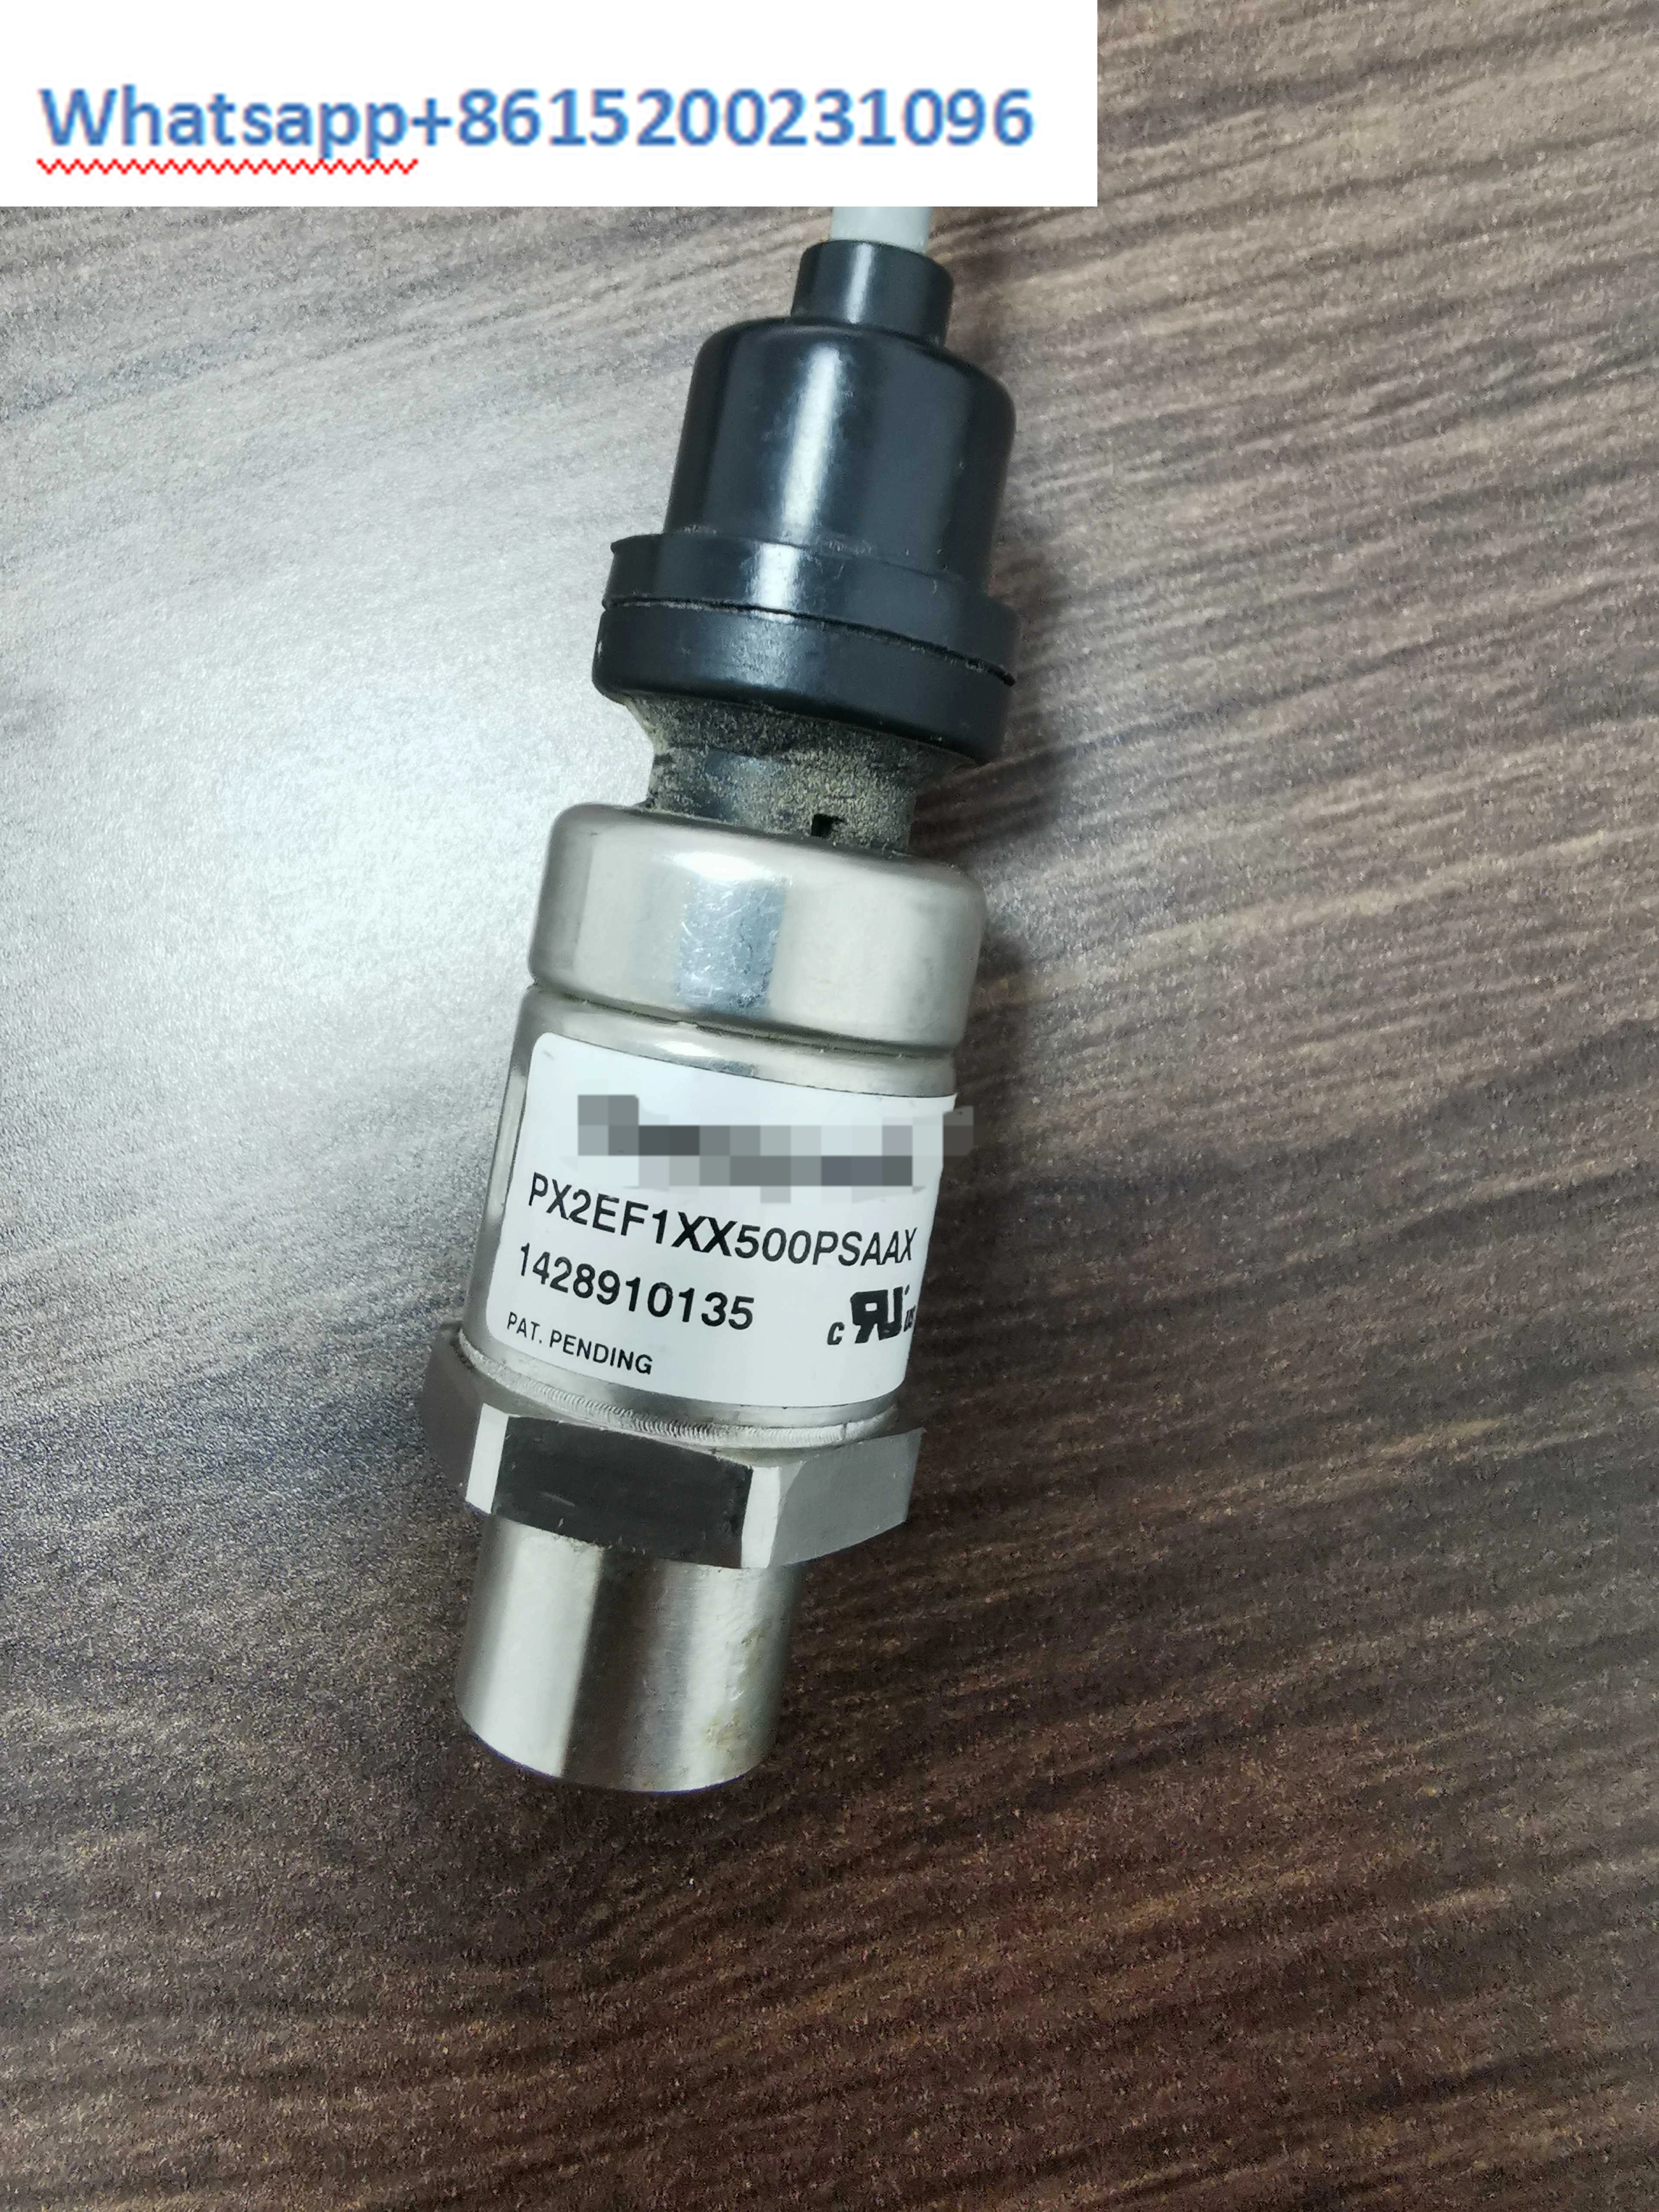 

Imported PX2EF1XX500PSAAX air conditioning pressure sensor high and low pressure transmitter